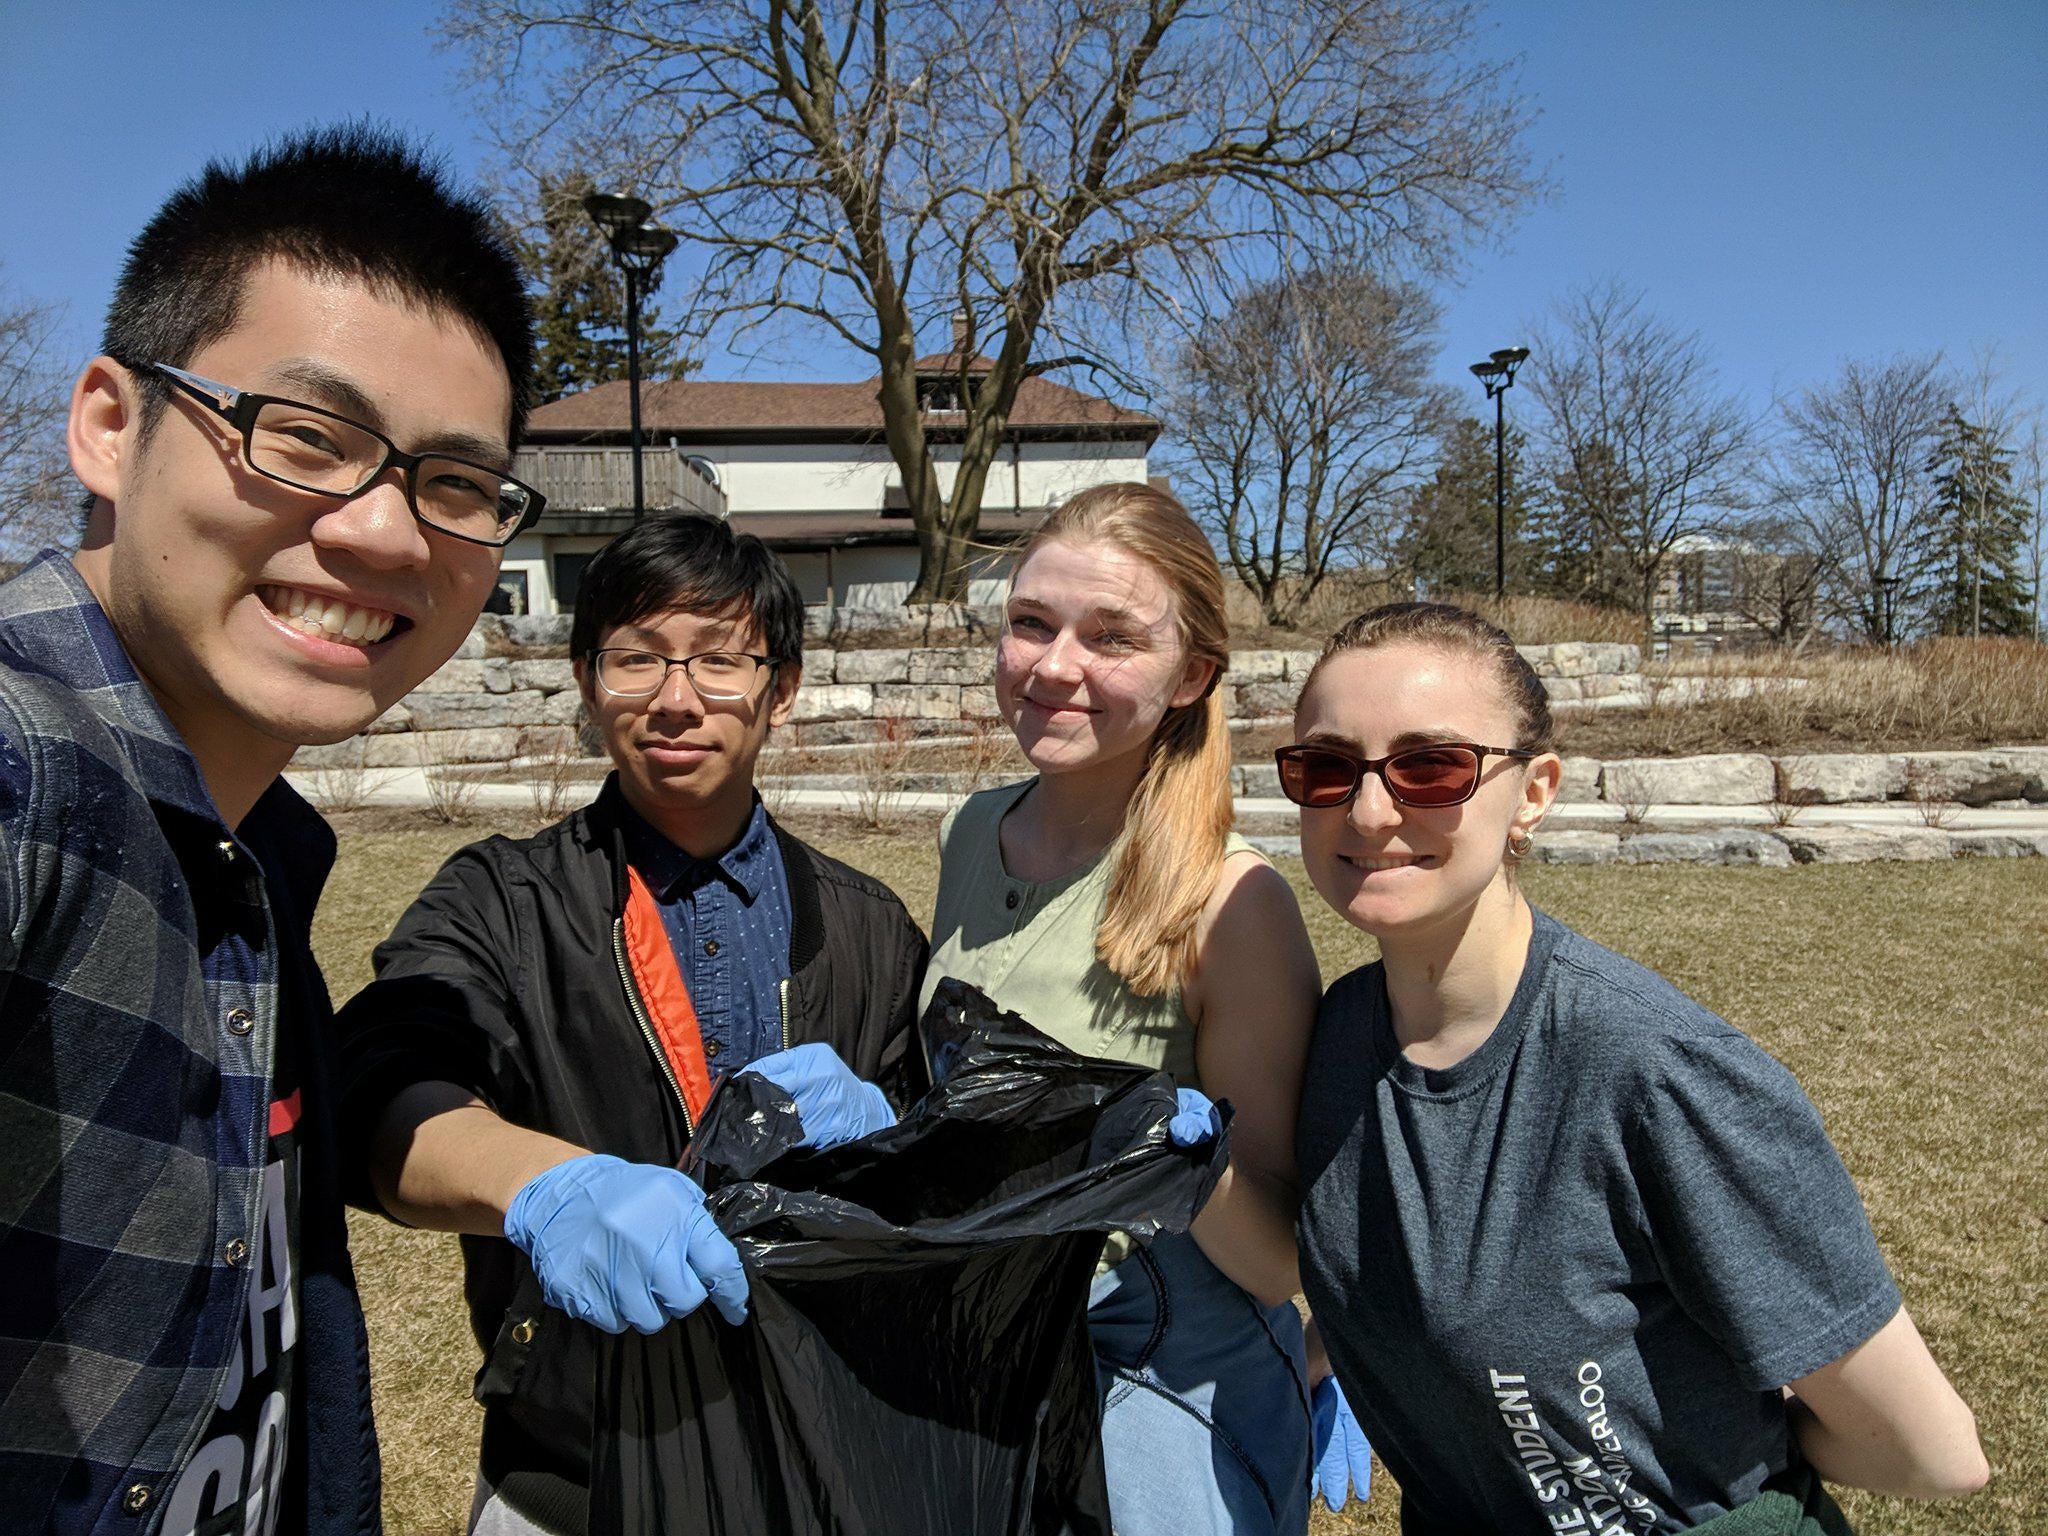 The team picking up garbage on earth day